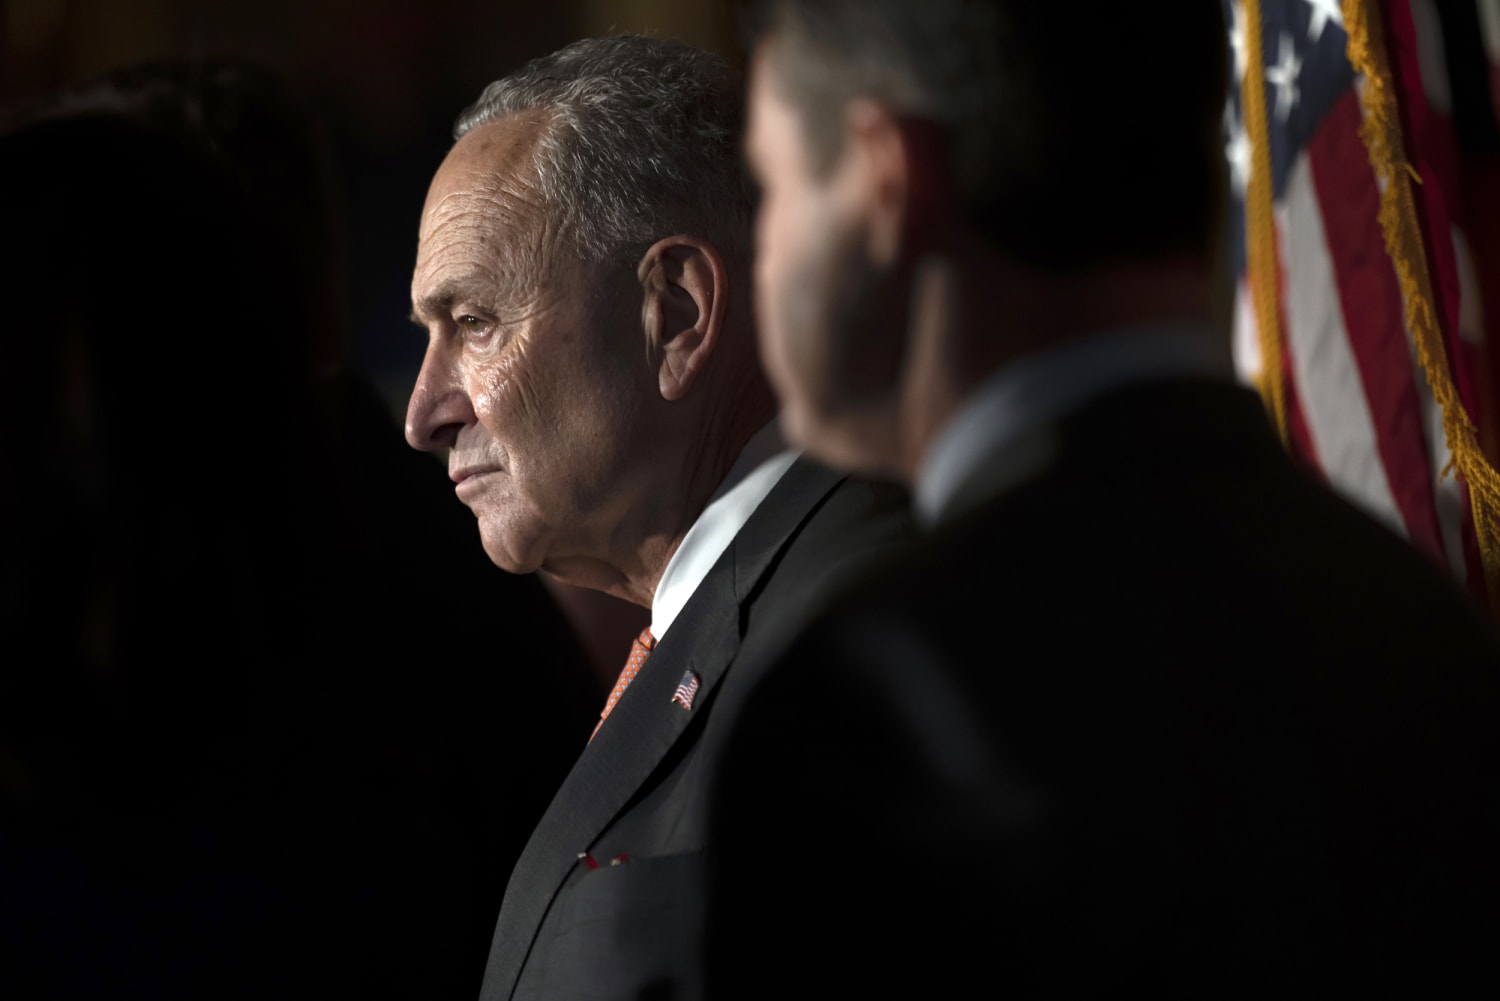 Schumer says Warnock’s Senate race against Walker is ‘going downhill’ in remarks to president